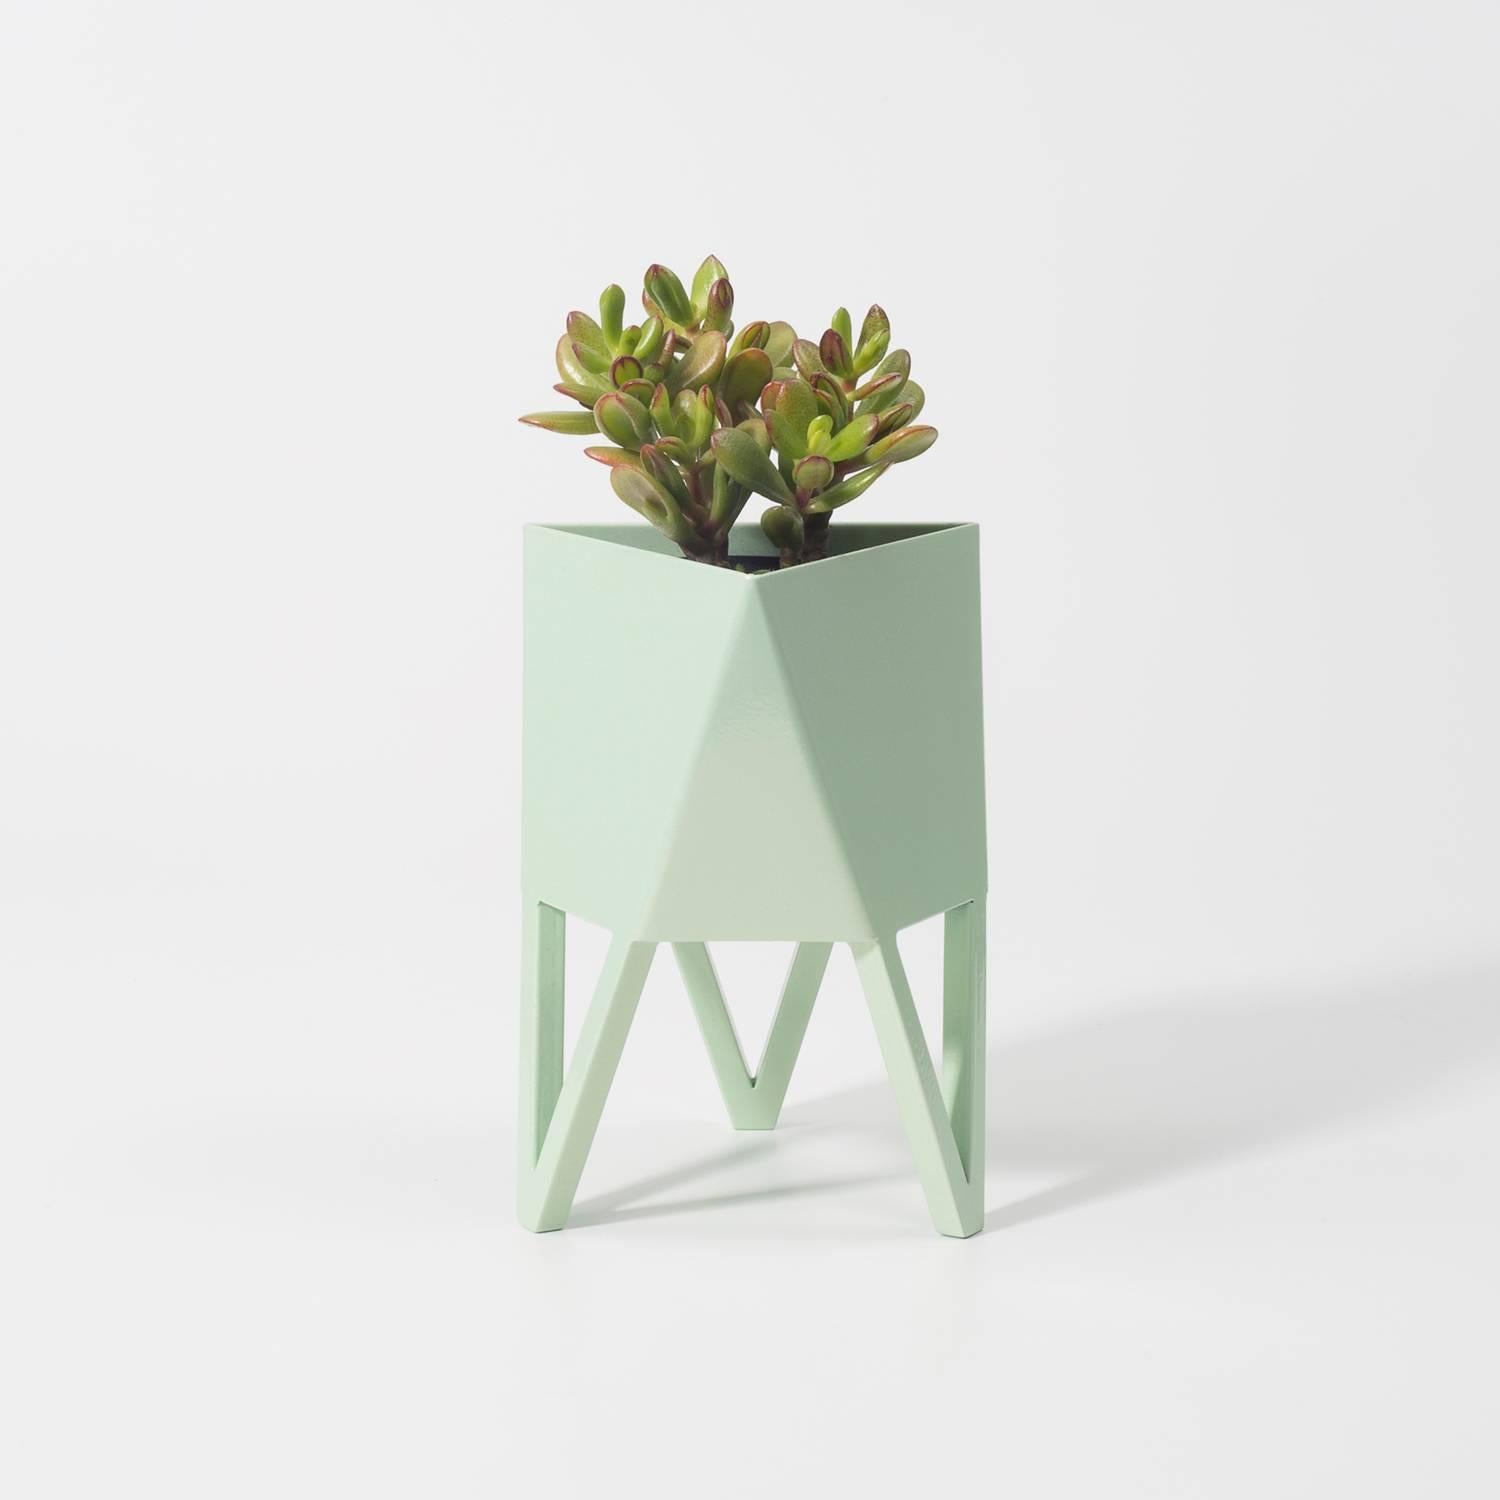 Deca Planter in Light Pink Steel, Large, by Force/Collide 1